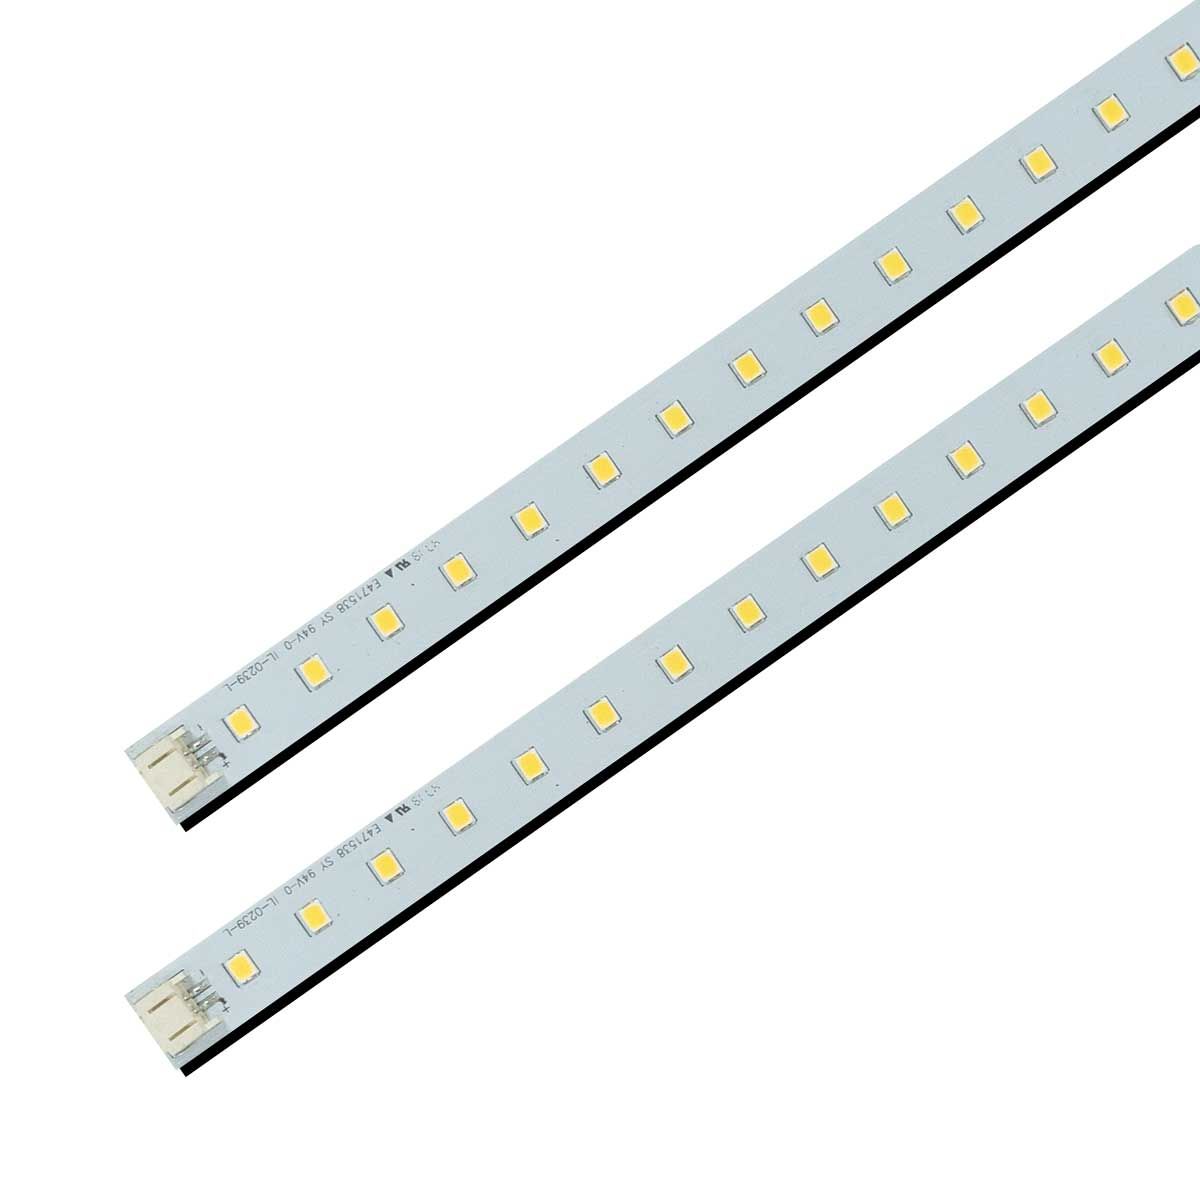 Fluorescent Lights To Led, How To Remove The Cover Of A Fluorescent Light Fixture